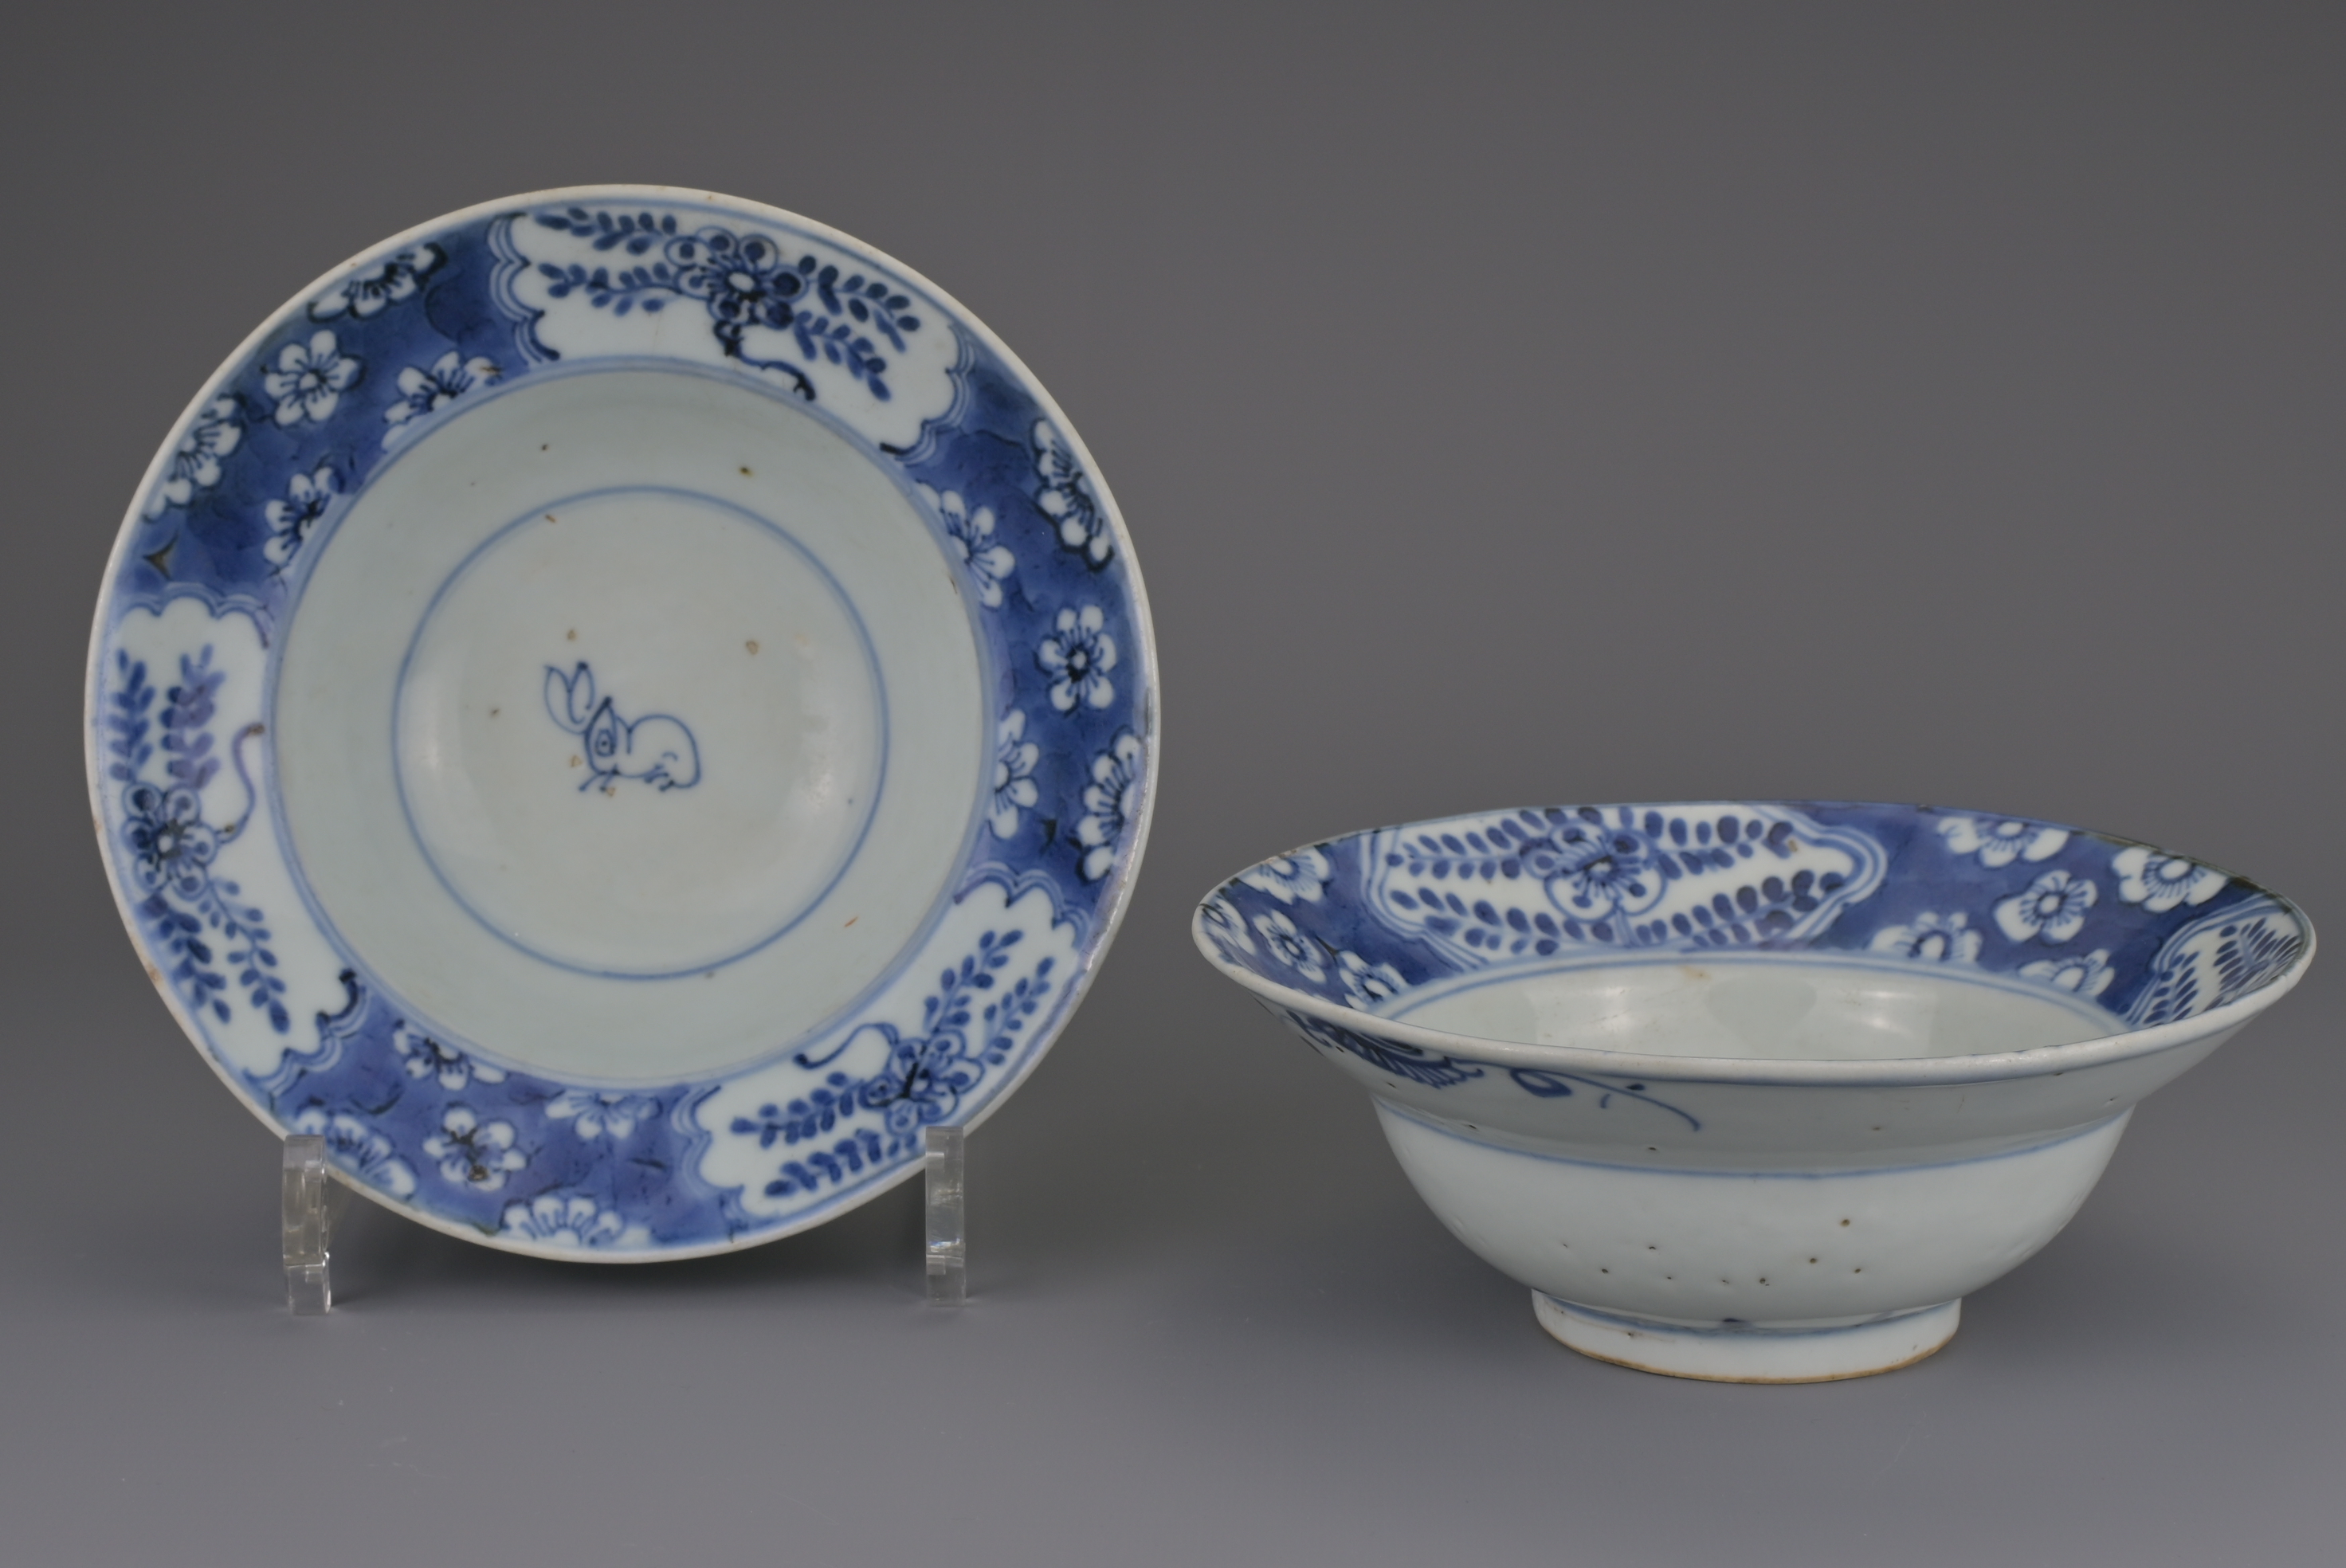 A PAIR OF CHINESE BLUE AND WHITE PORCELAIN KLAPMUTS BOWLS, LATE MING/EARLY QING DYNASTY, 17TH CENTUR - Image 2 of 8